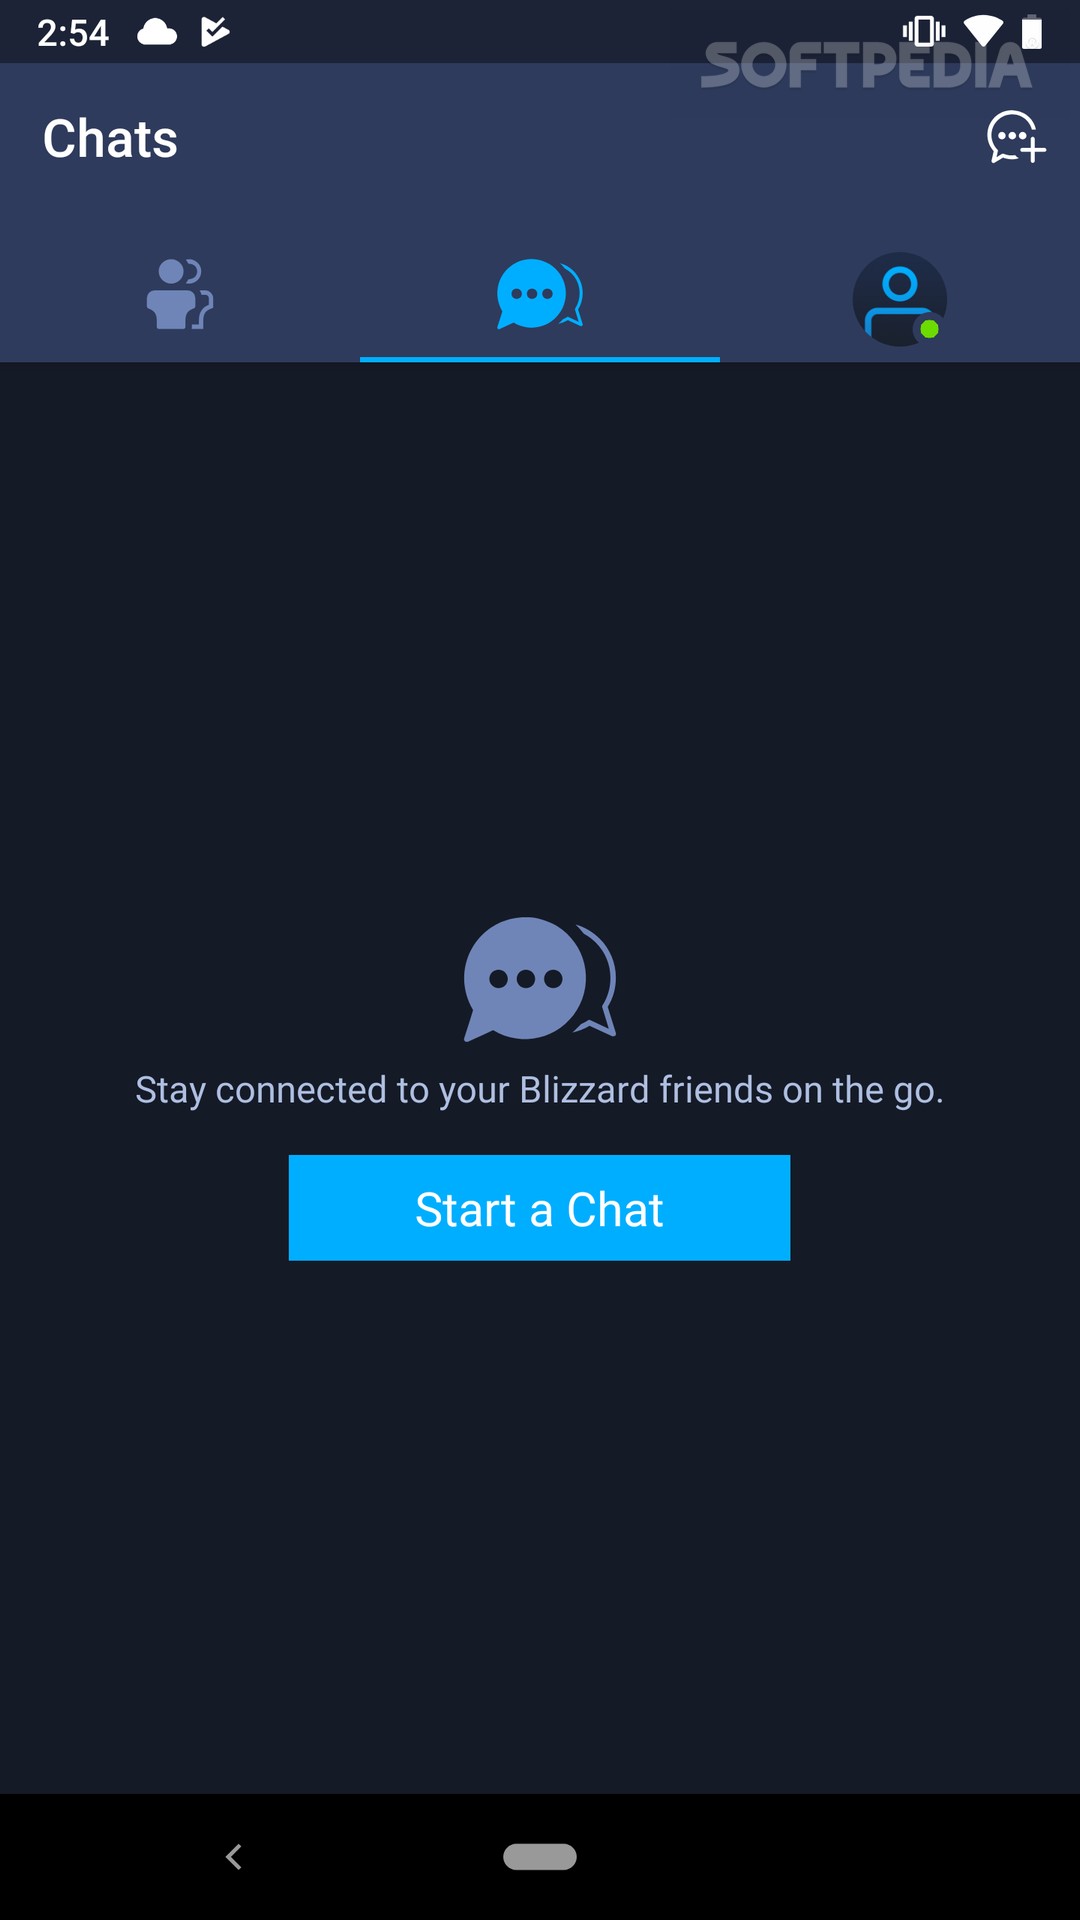 a blizzard battle.net resync has been requested